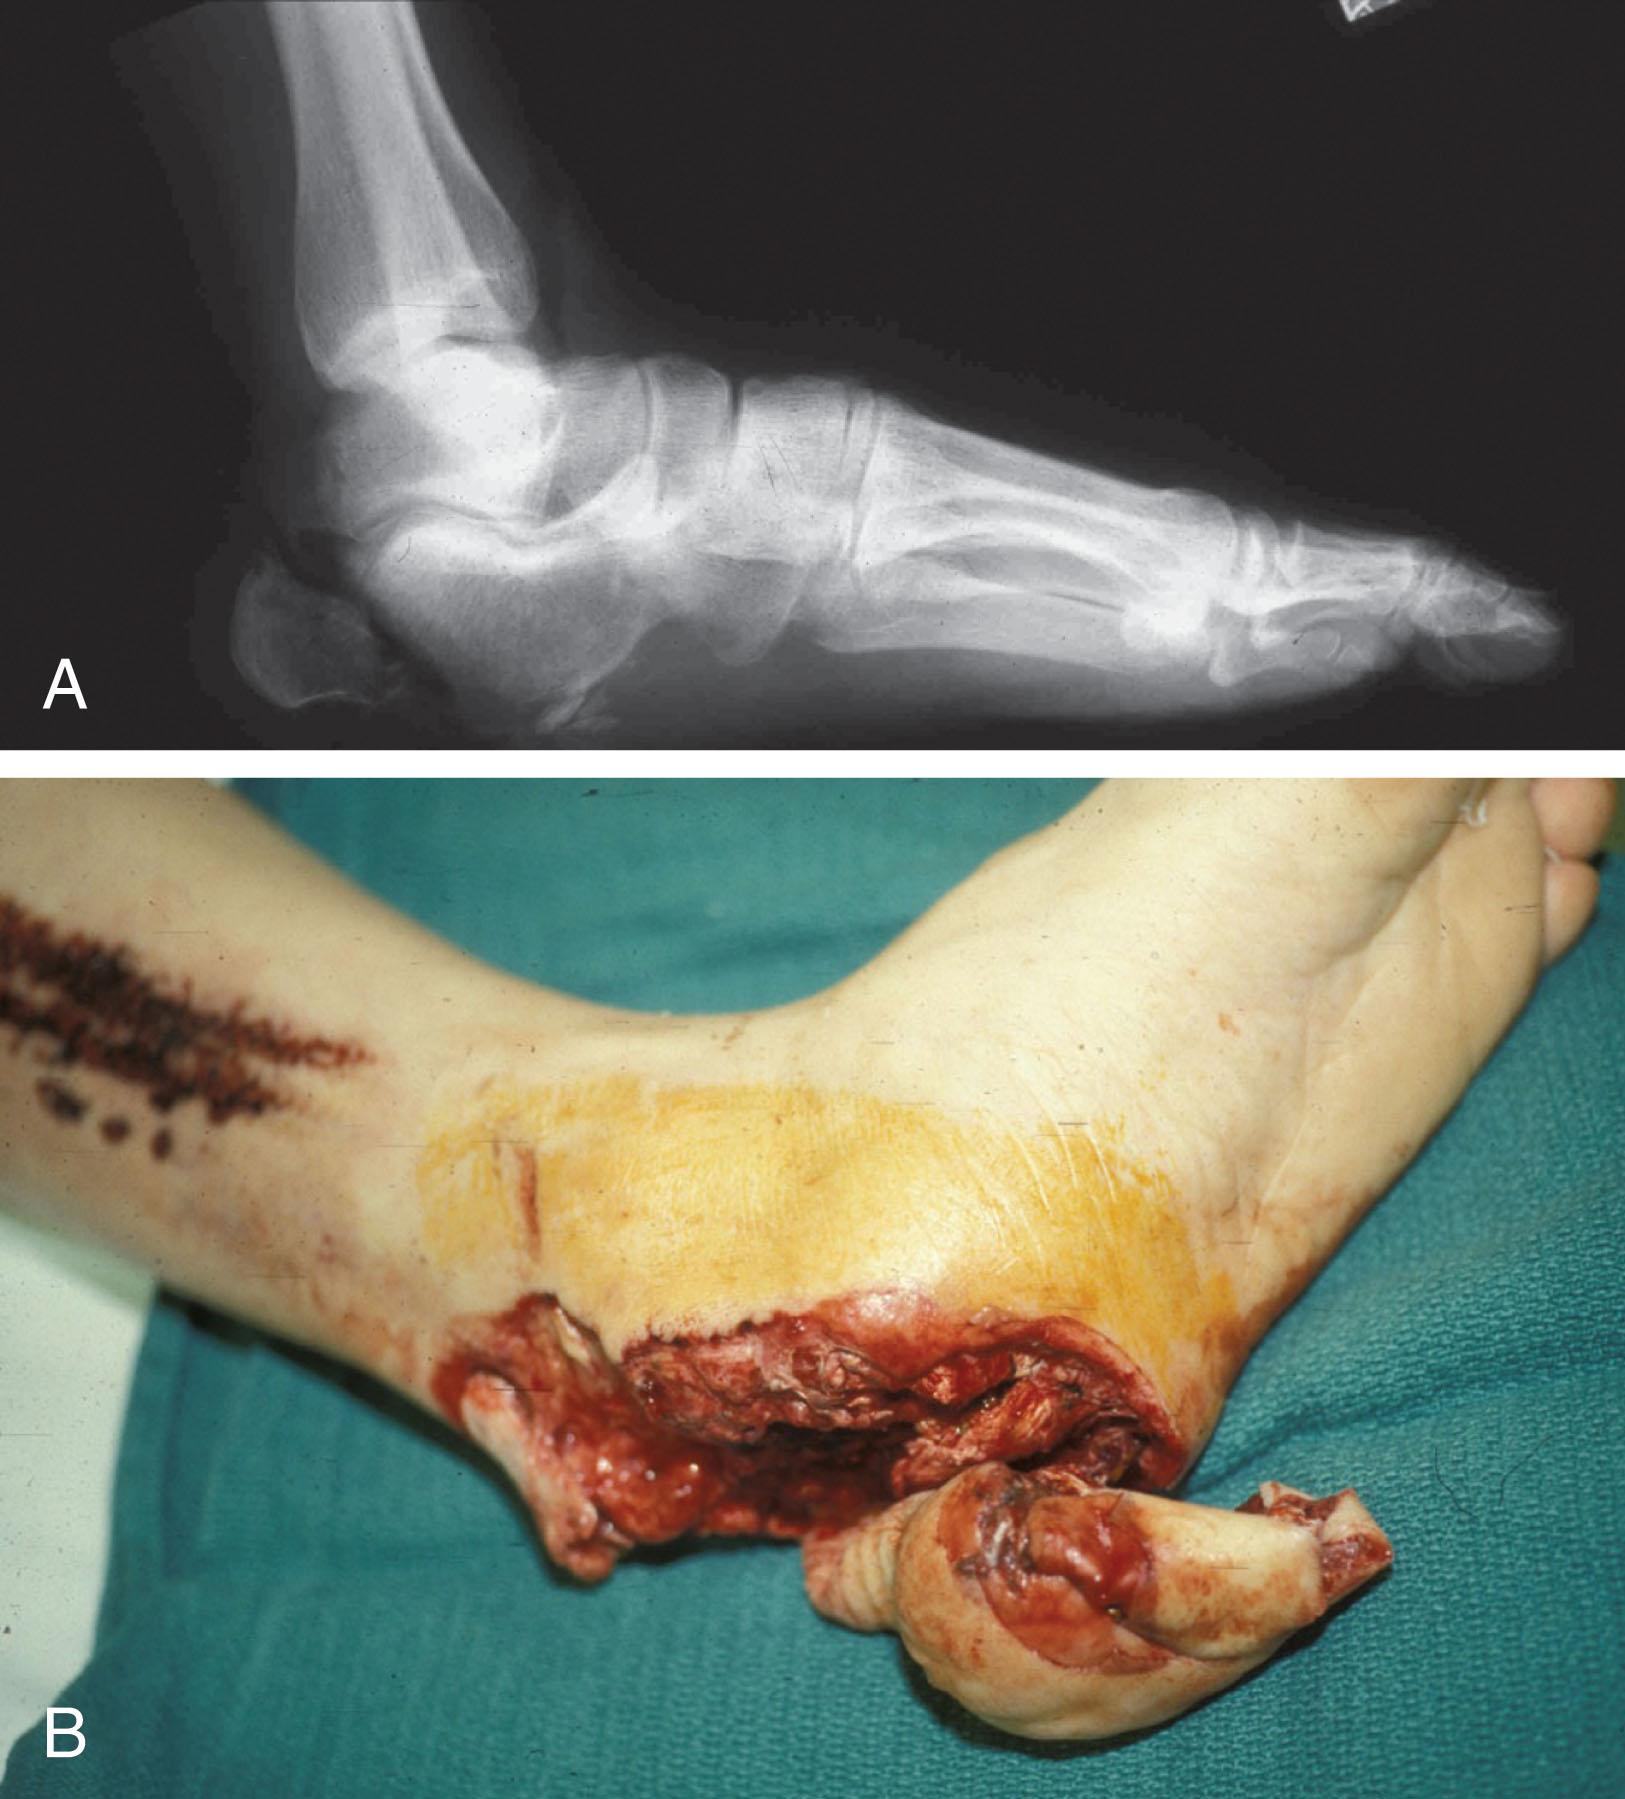 Fig. 42-6, Radiographic image (A) and photograph (B) of a type 3B open calcaneus fracture.